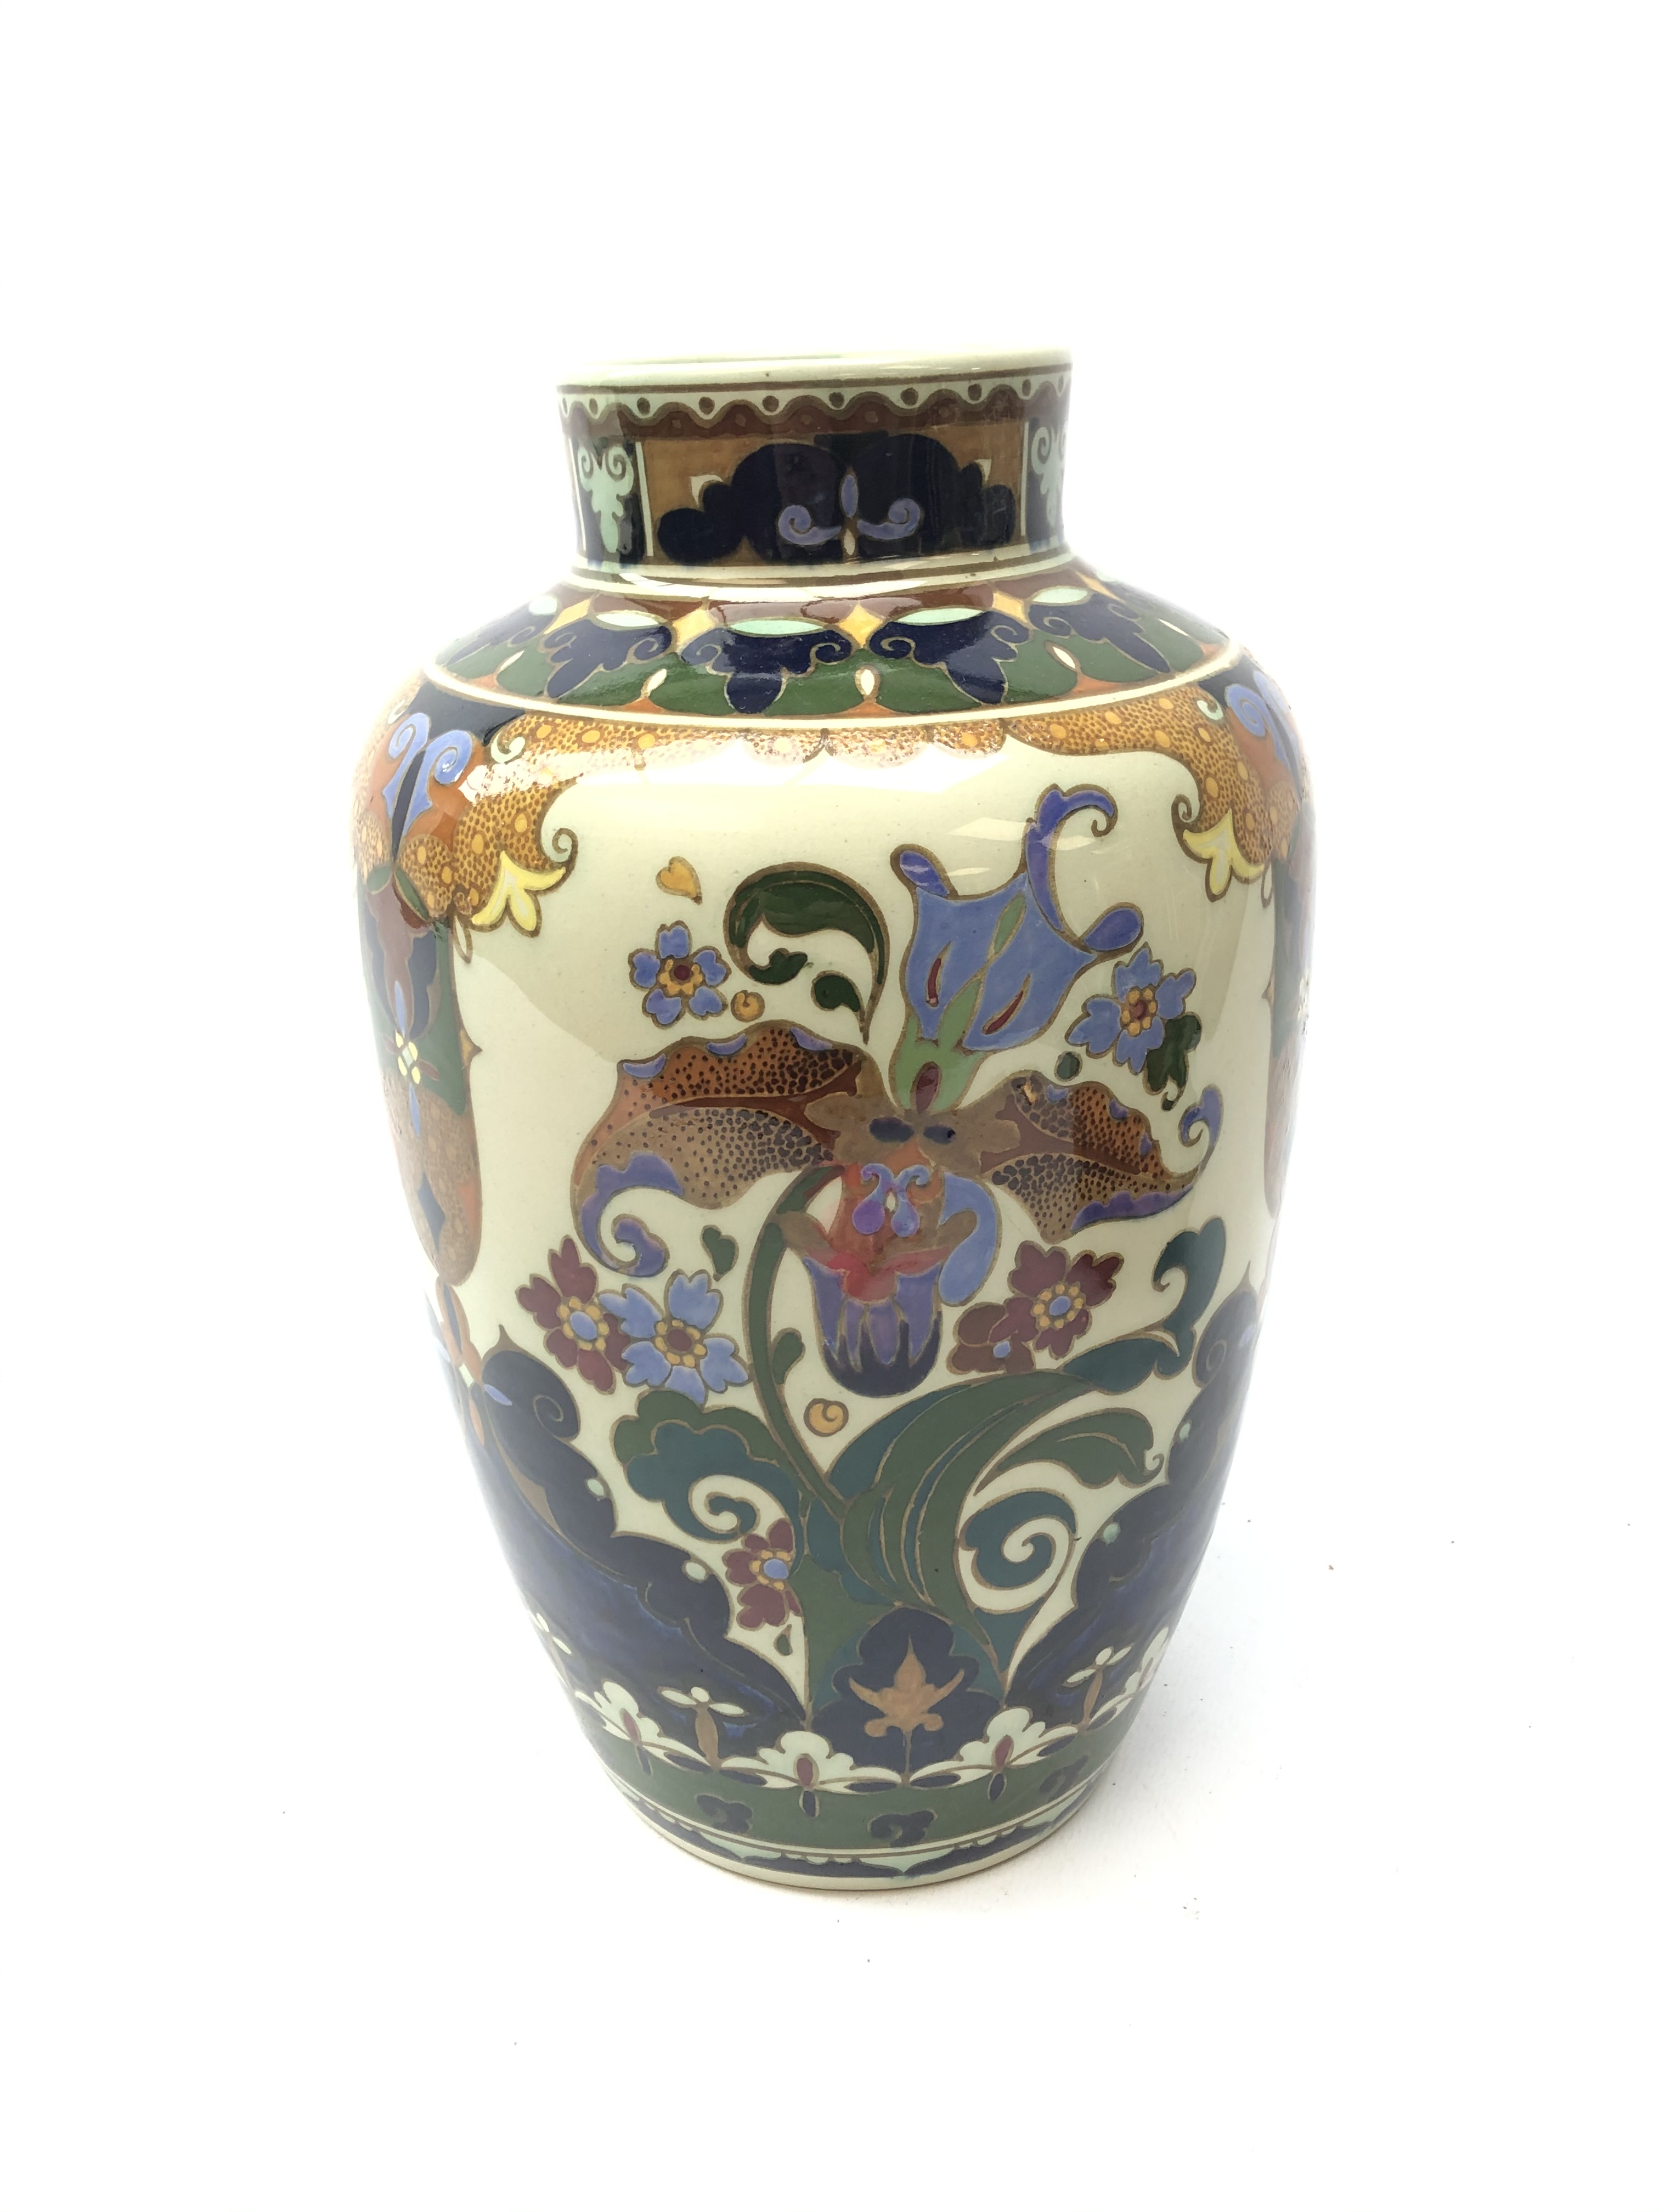 Rozenburg Den Haag vase decorated with exotic birds and flowers on pattern ground,